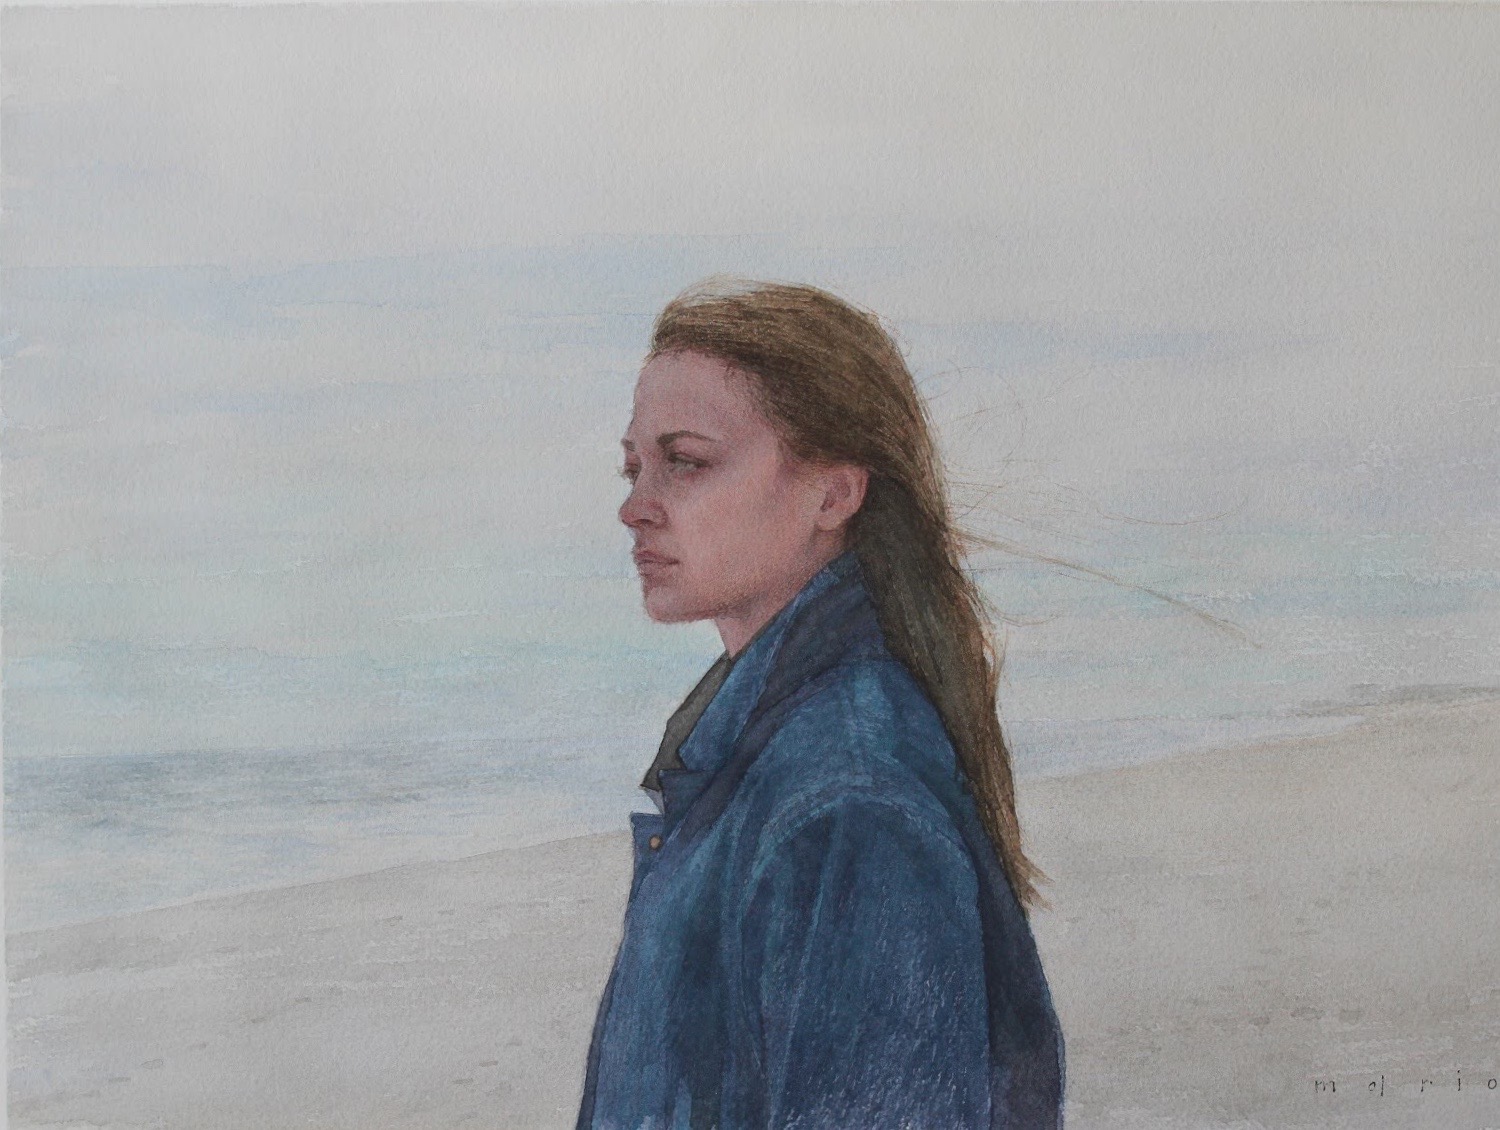 Painting of a woman with long hair wearing a blue coat at the beach bu artist and workshop tutor Mario Andres Robinson.